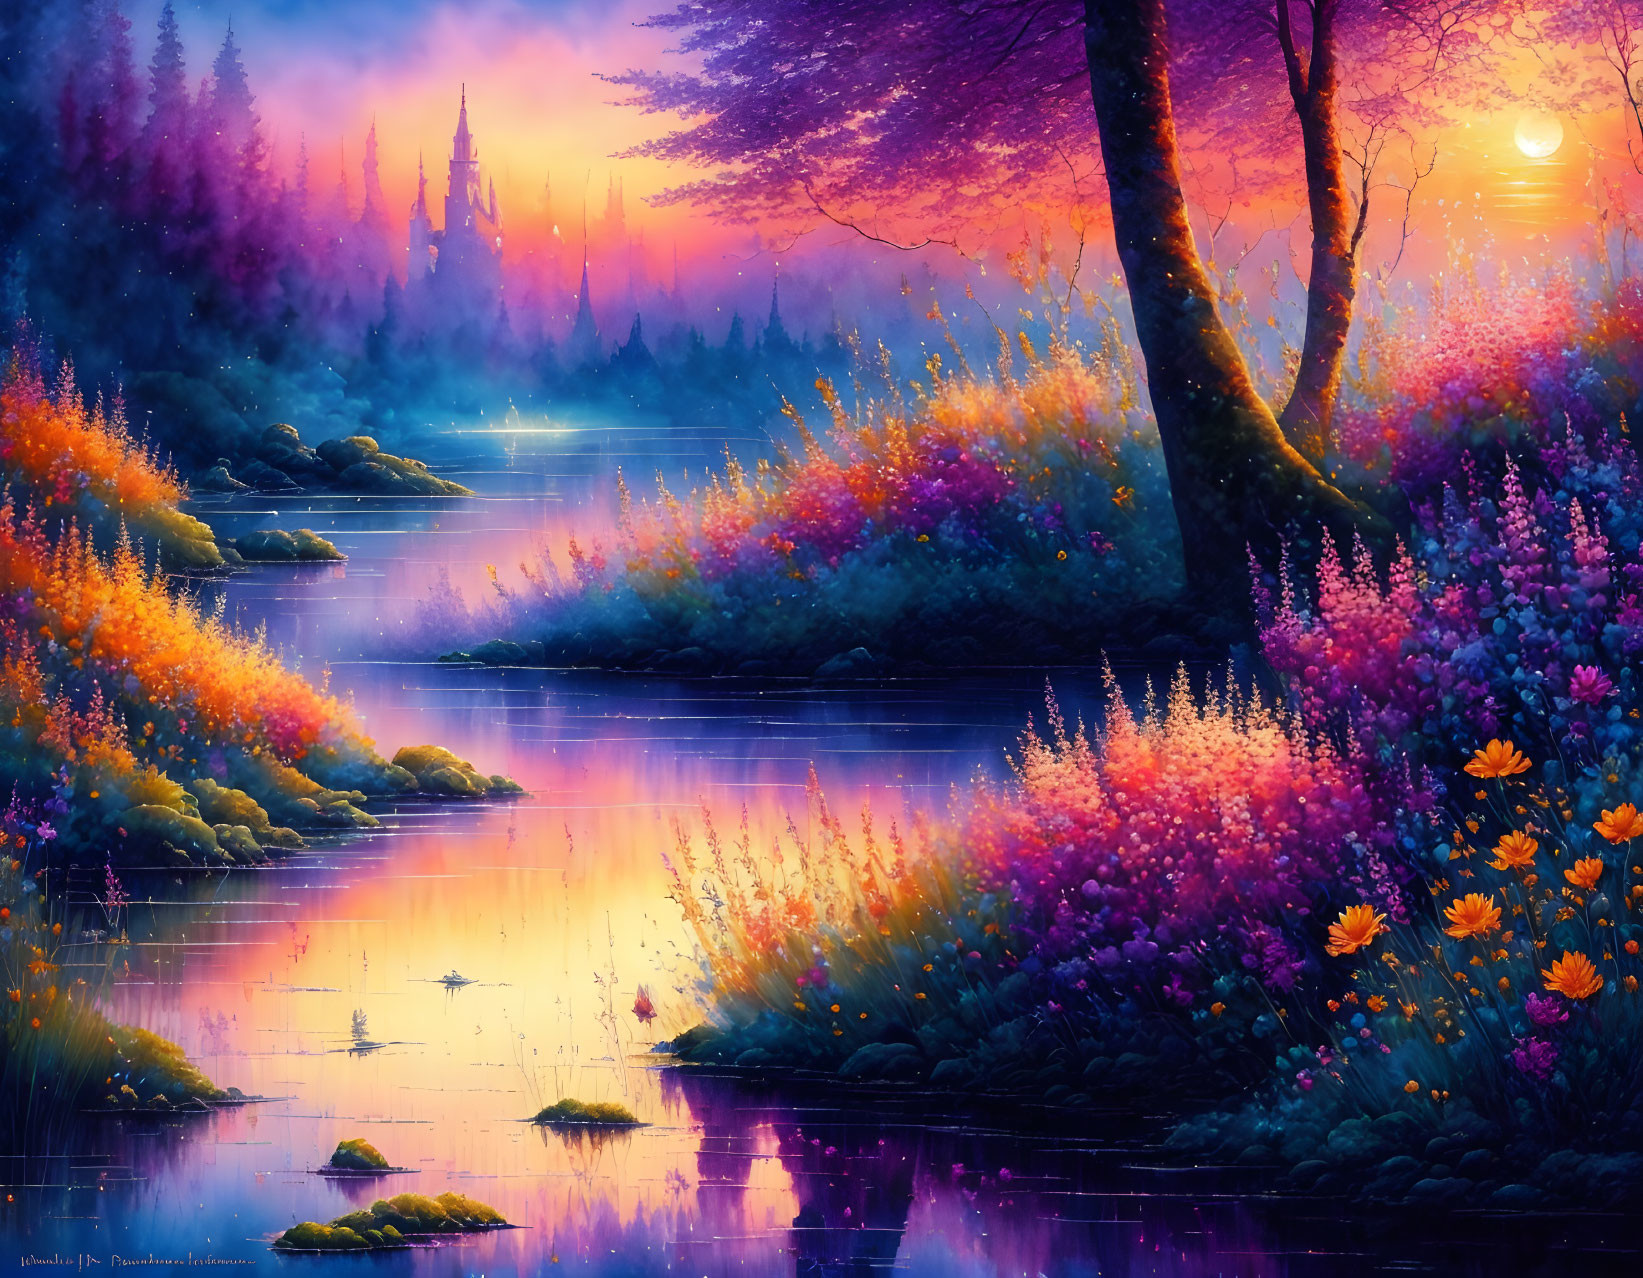 Scenic sunset landscape with purple and pink hues over calm river